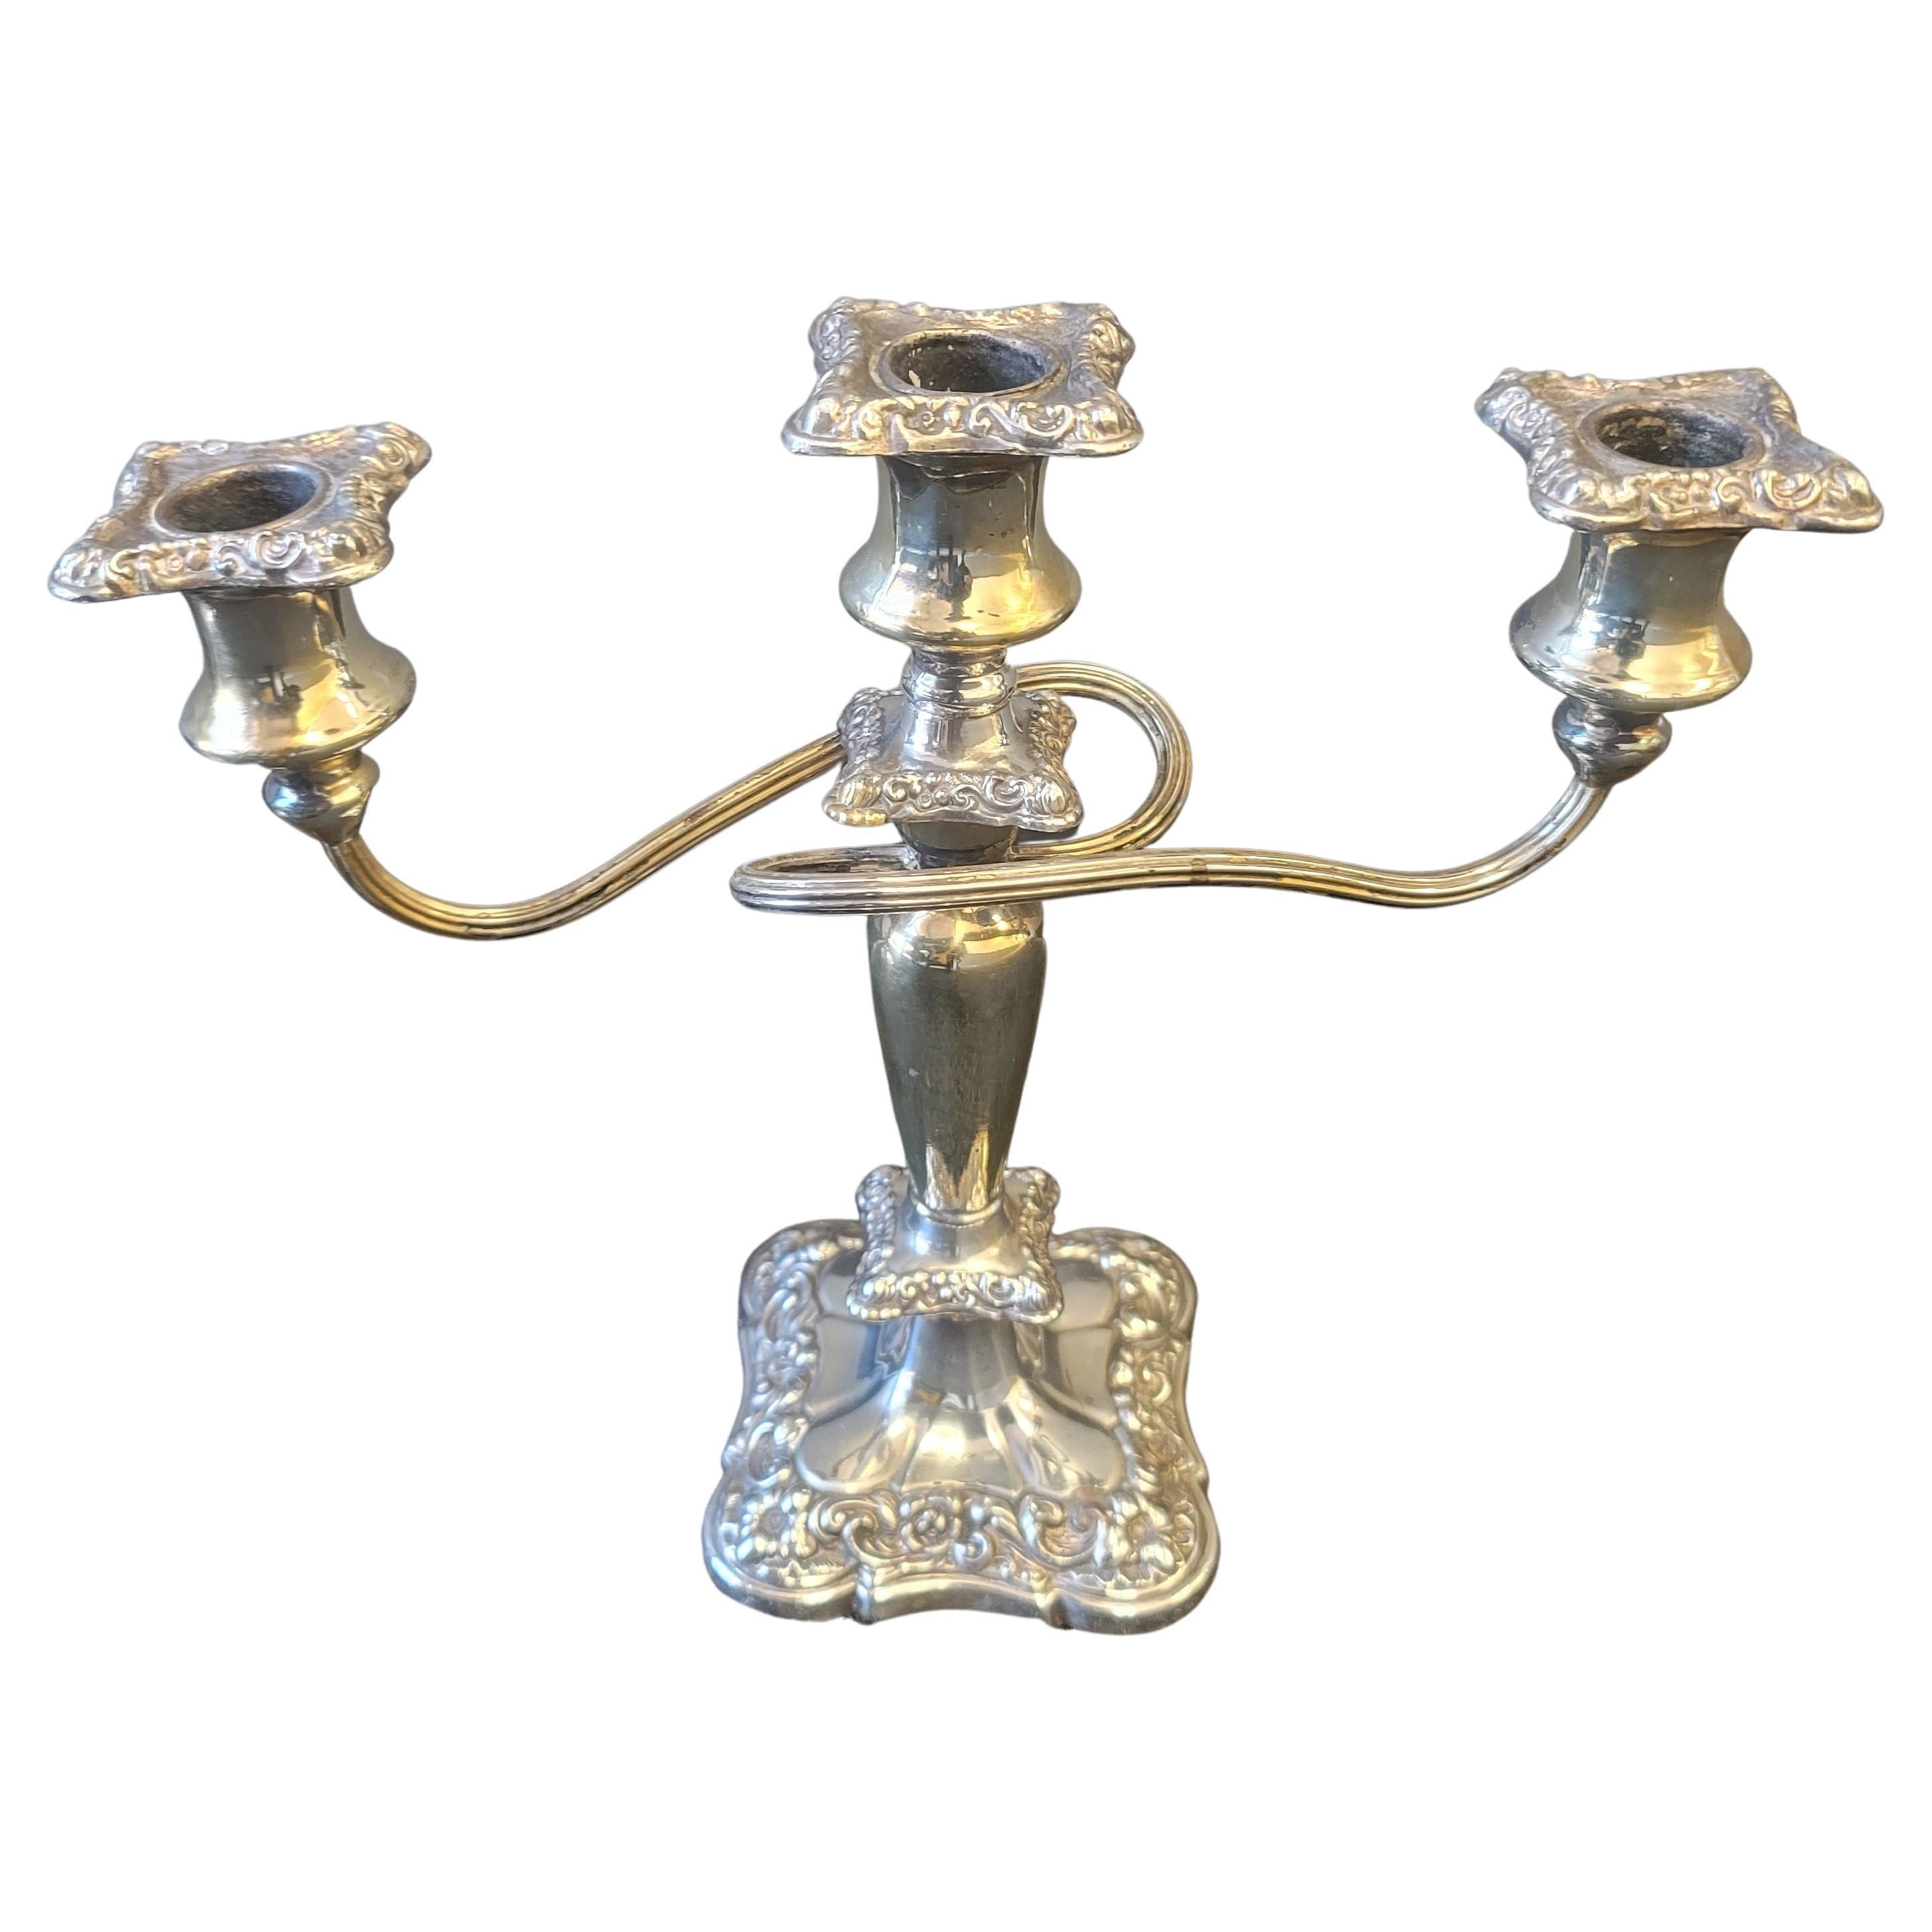 Pair of antique English ornate silverplate Candelabra measuring 11.5